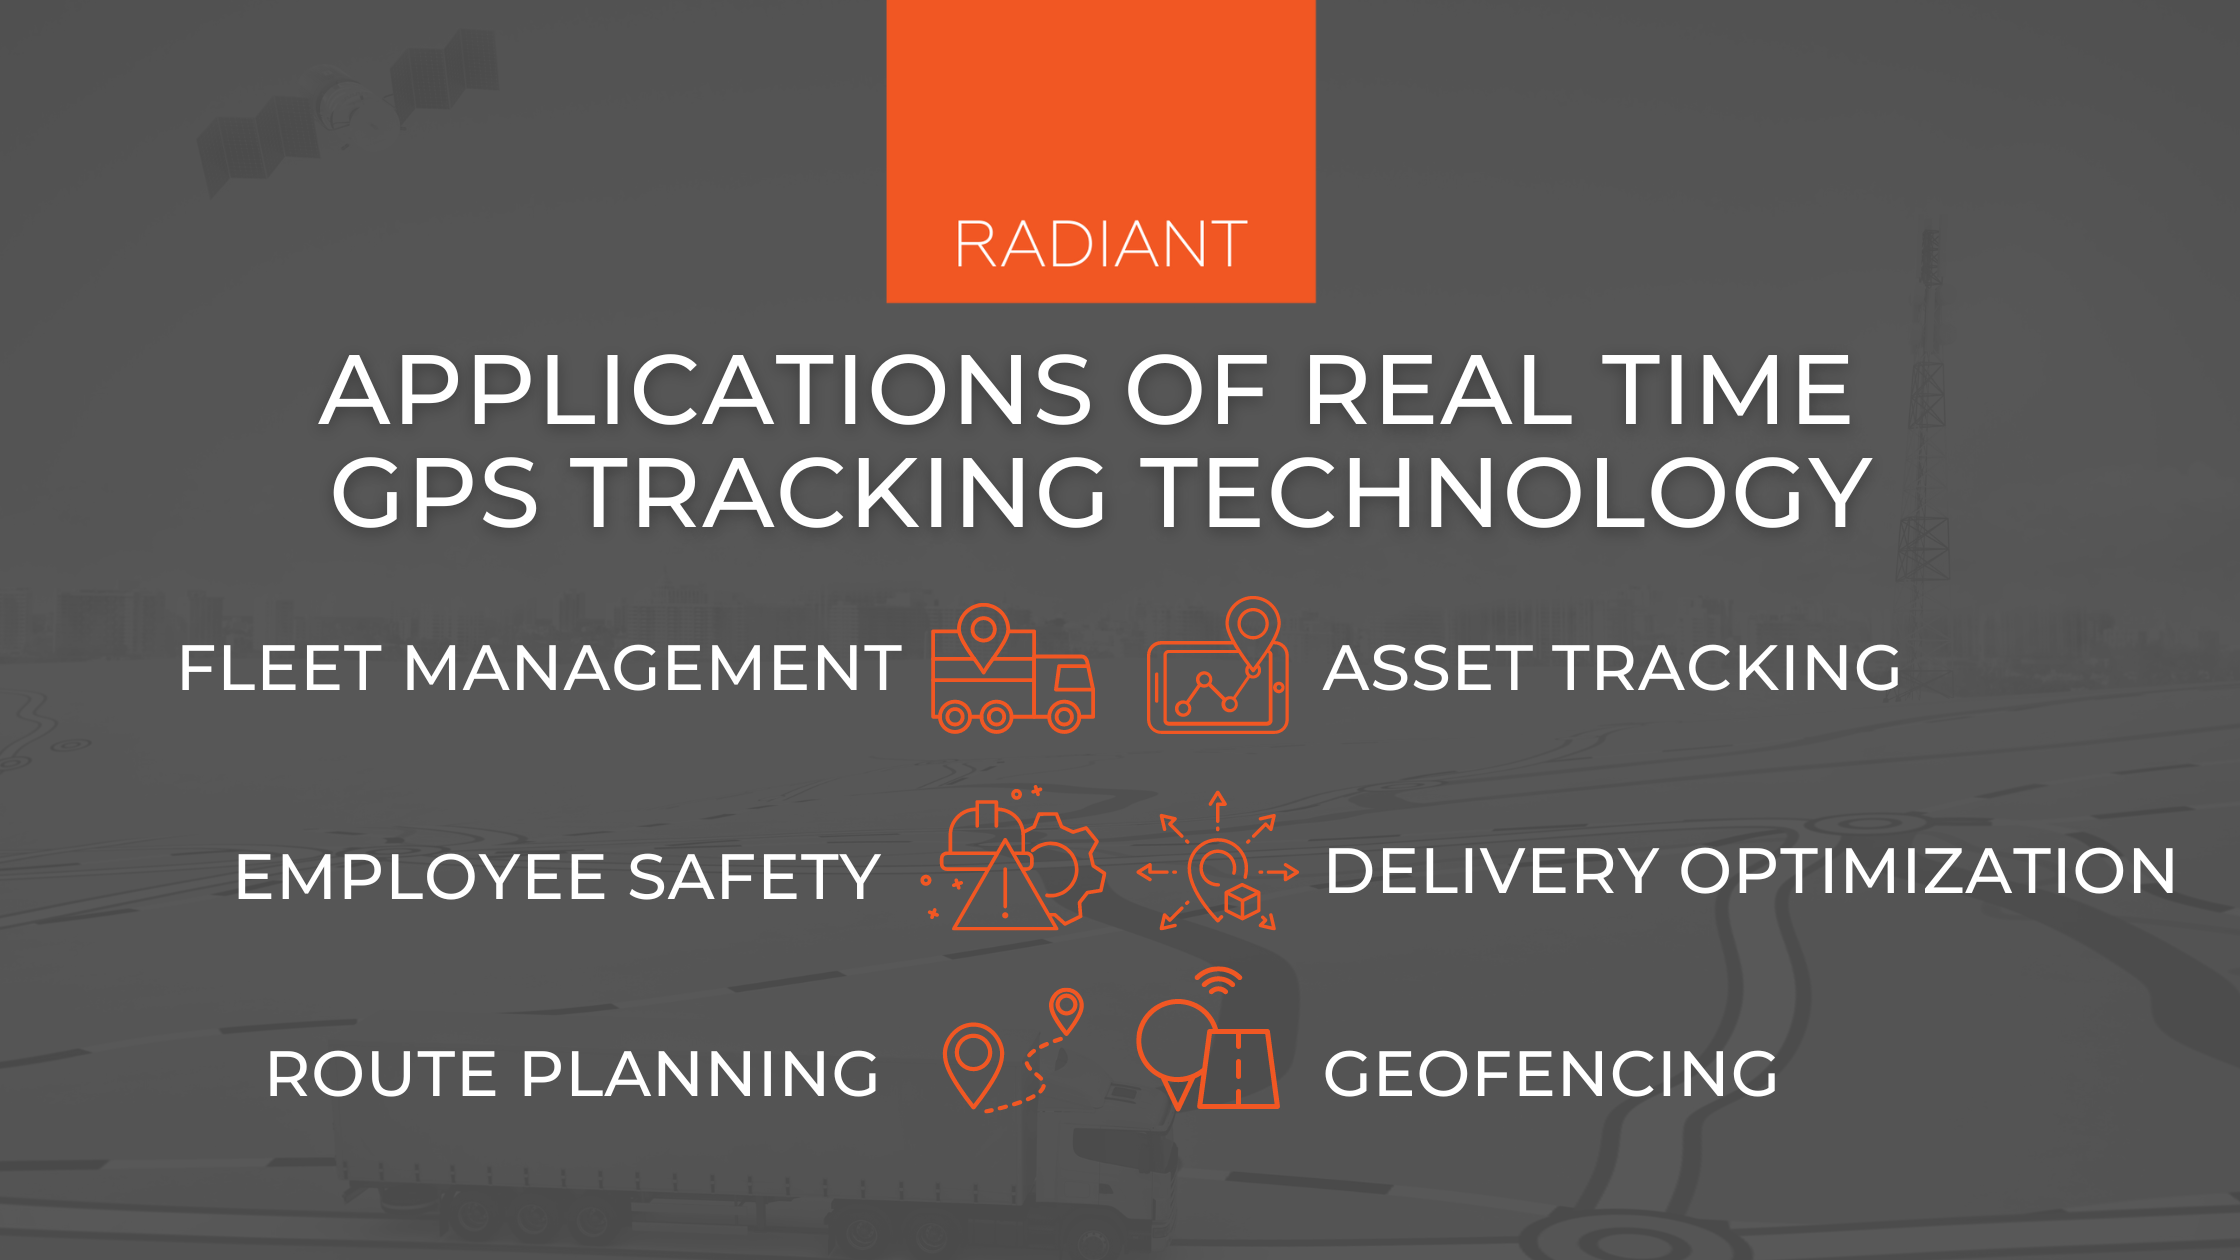 What Is Real Time GPS Tracking - Real Time GPS Tracking - Real-Time GPS Tracking - Real Time GPS Tracker - GPS Tracking Real Time - GPS Tracker Real Time - Real Time Tracker GPS - GPS Real Time Tracking - Real-Time GPS Tracker - GPS Real Time Tracker - How Does Real Time GPS Tracking Work - IoT Asset Tracking